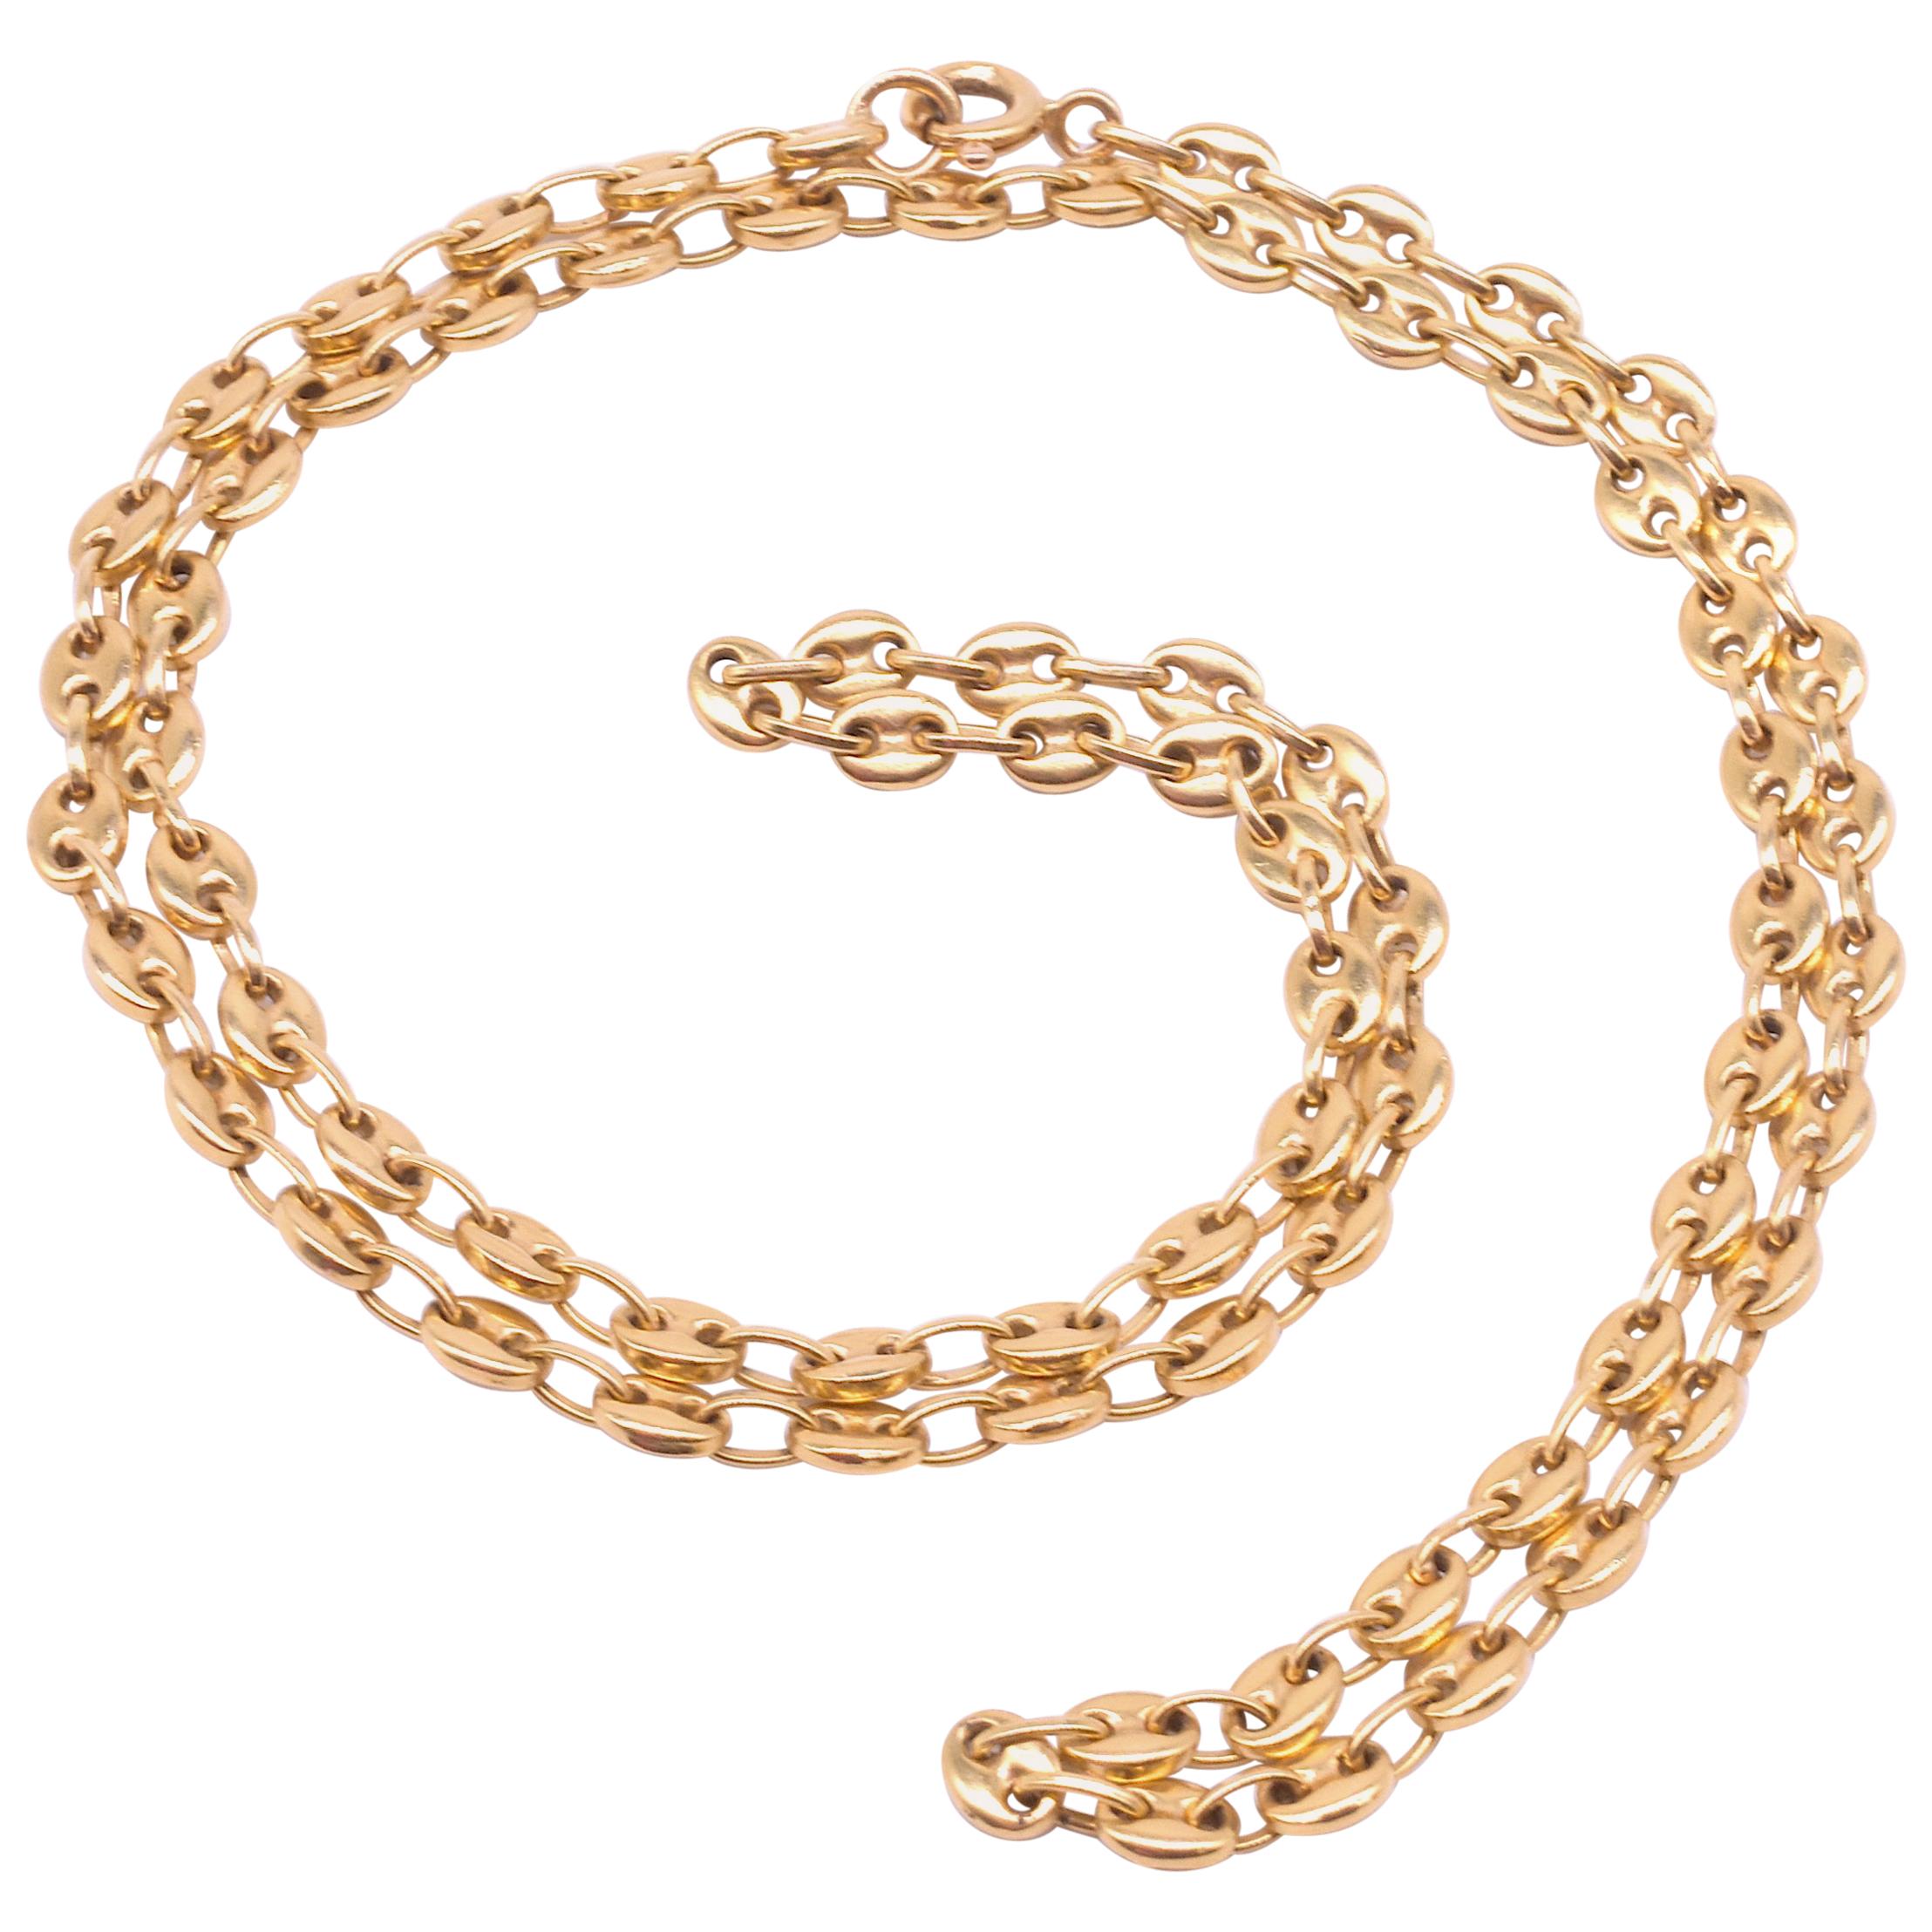 18 Karat Nautical Link Gucci style Necklace with Anchor Chain, circa 1900, 18.5"